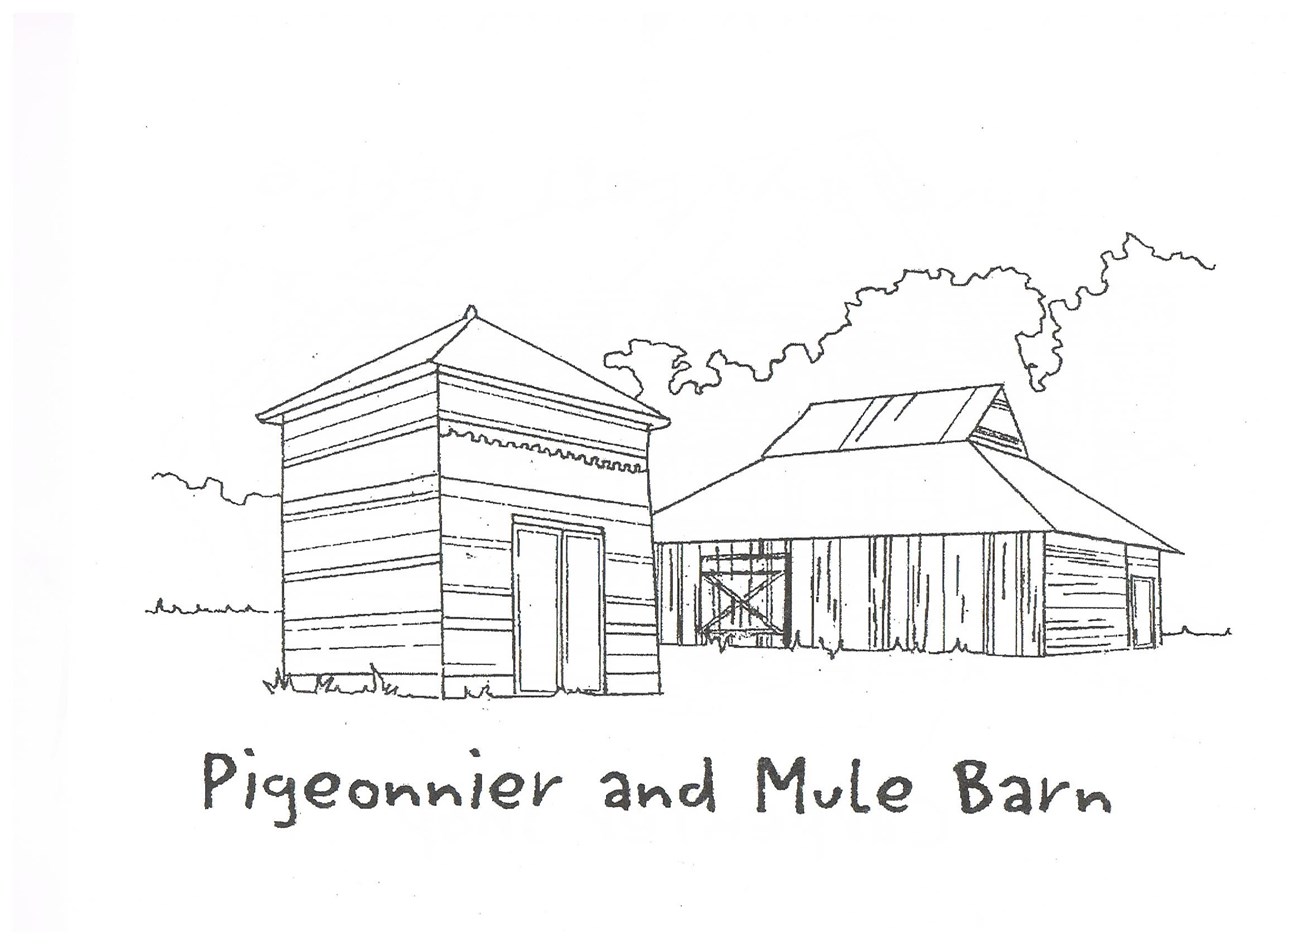 Drawing of the Oakland Plantation Pigeonnier and Mule Barn.